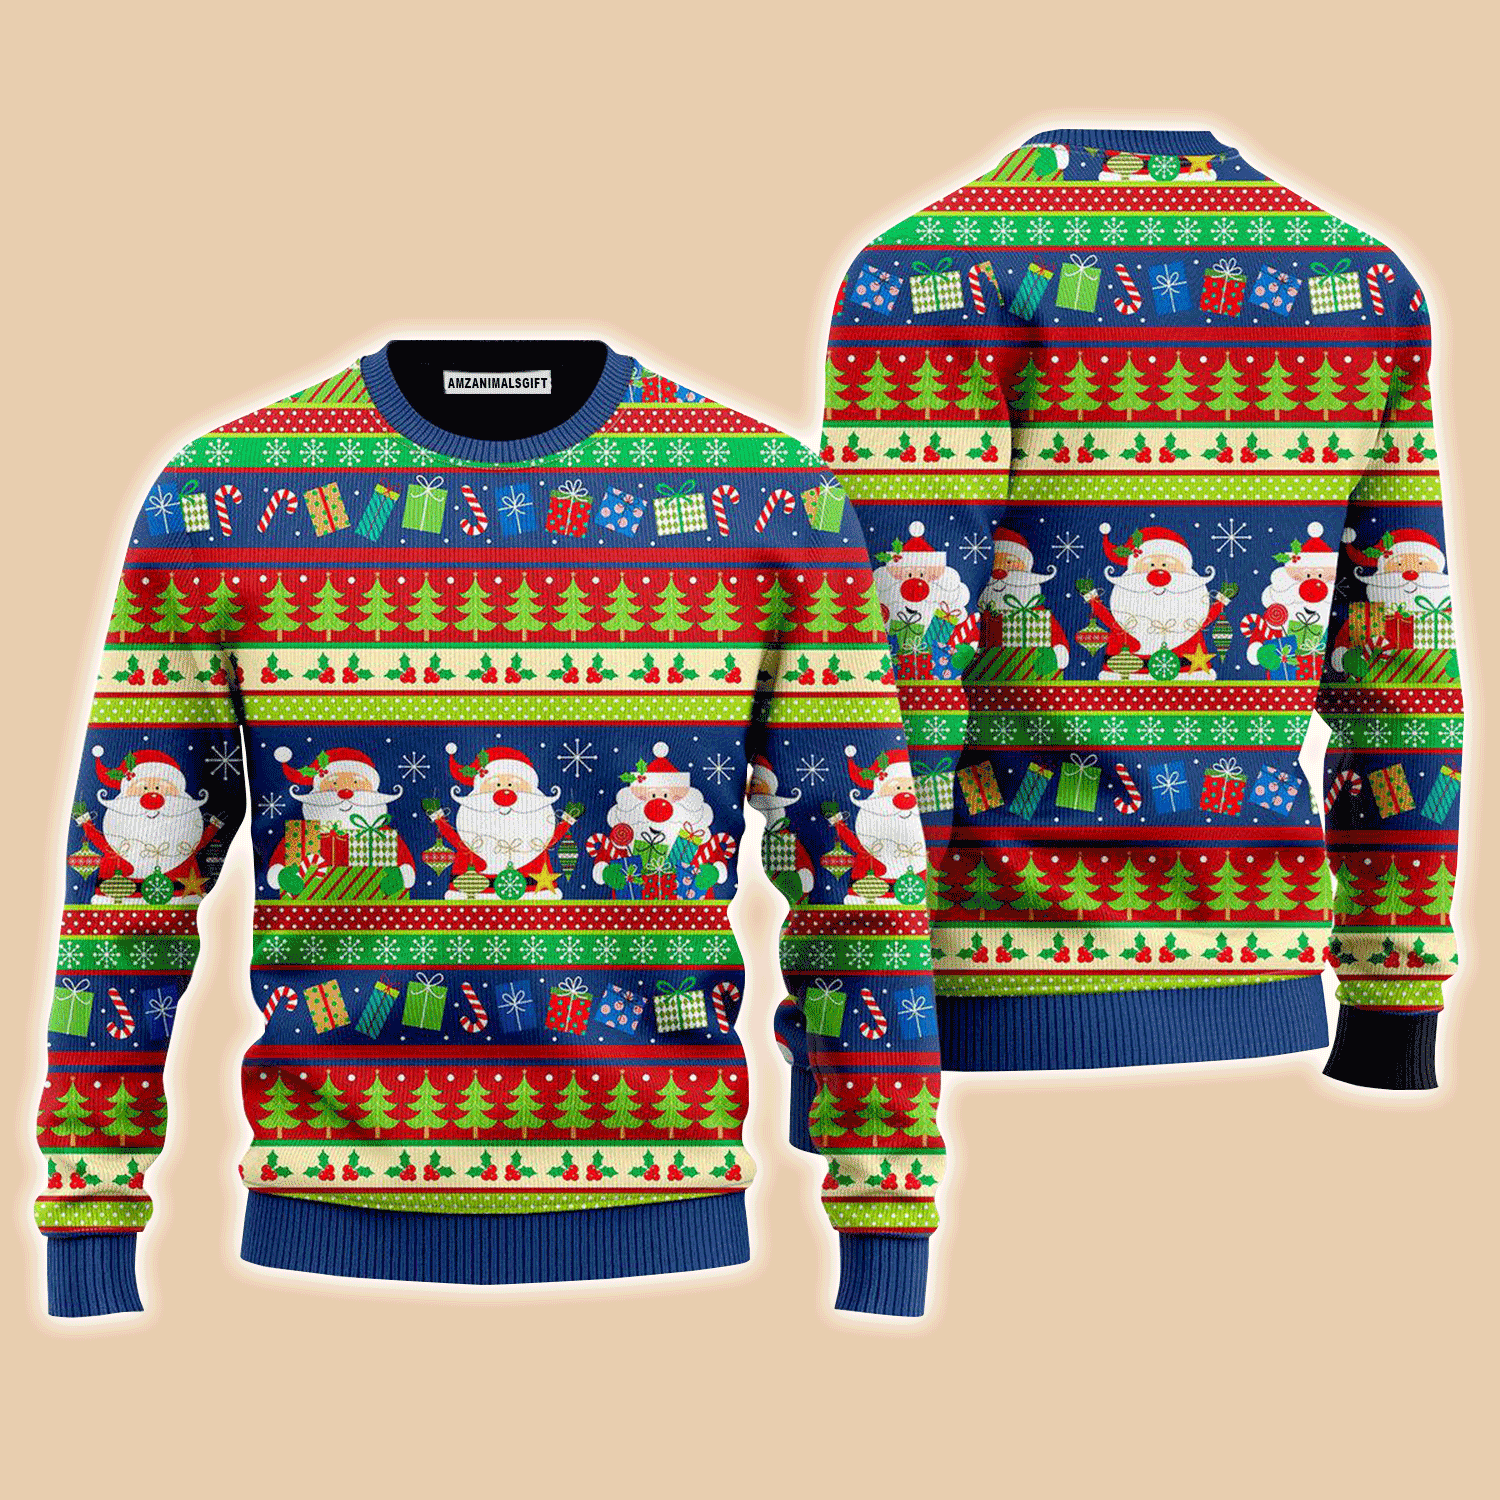 Gnomes Christmas Sweater All I Want For Christmas Is You, Ugly Sweater For Men & Women, Perfect Outfit For Christmas New Year Autumn Winter